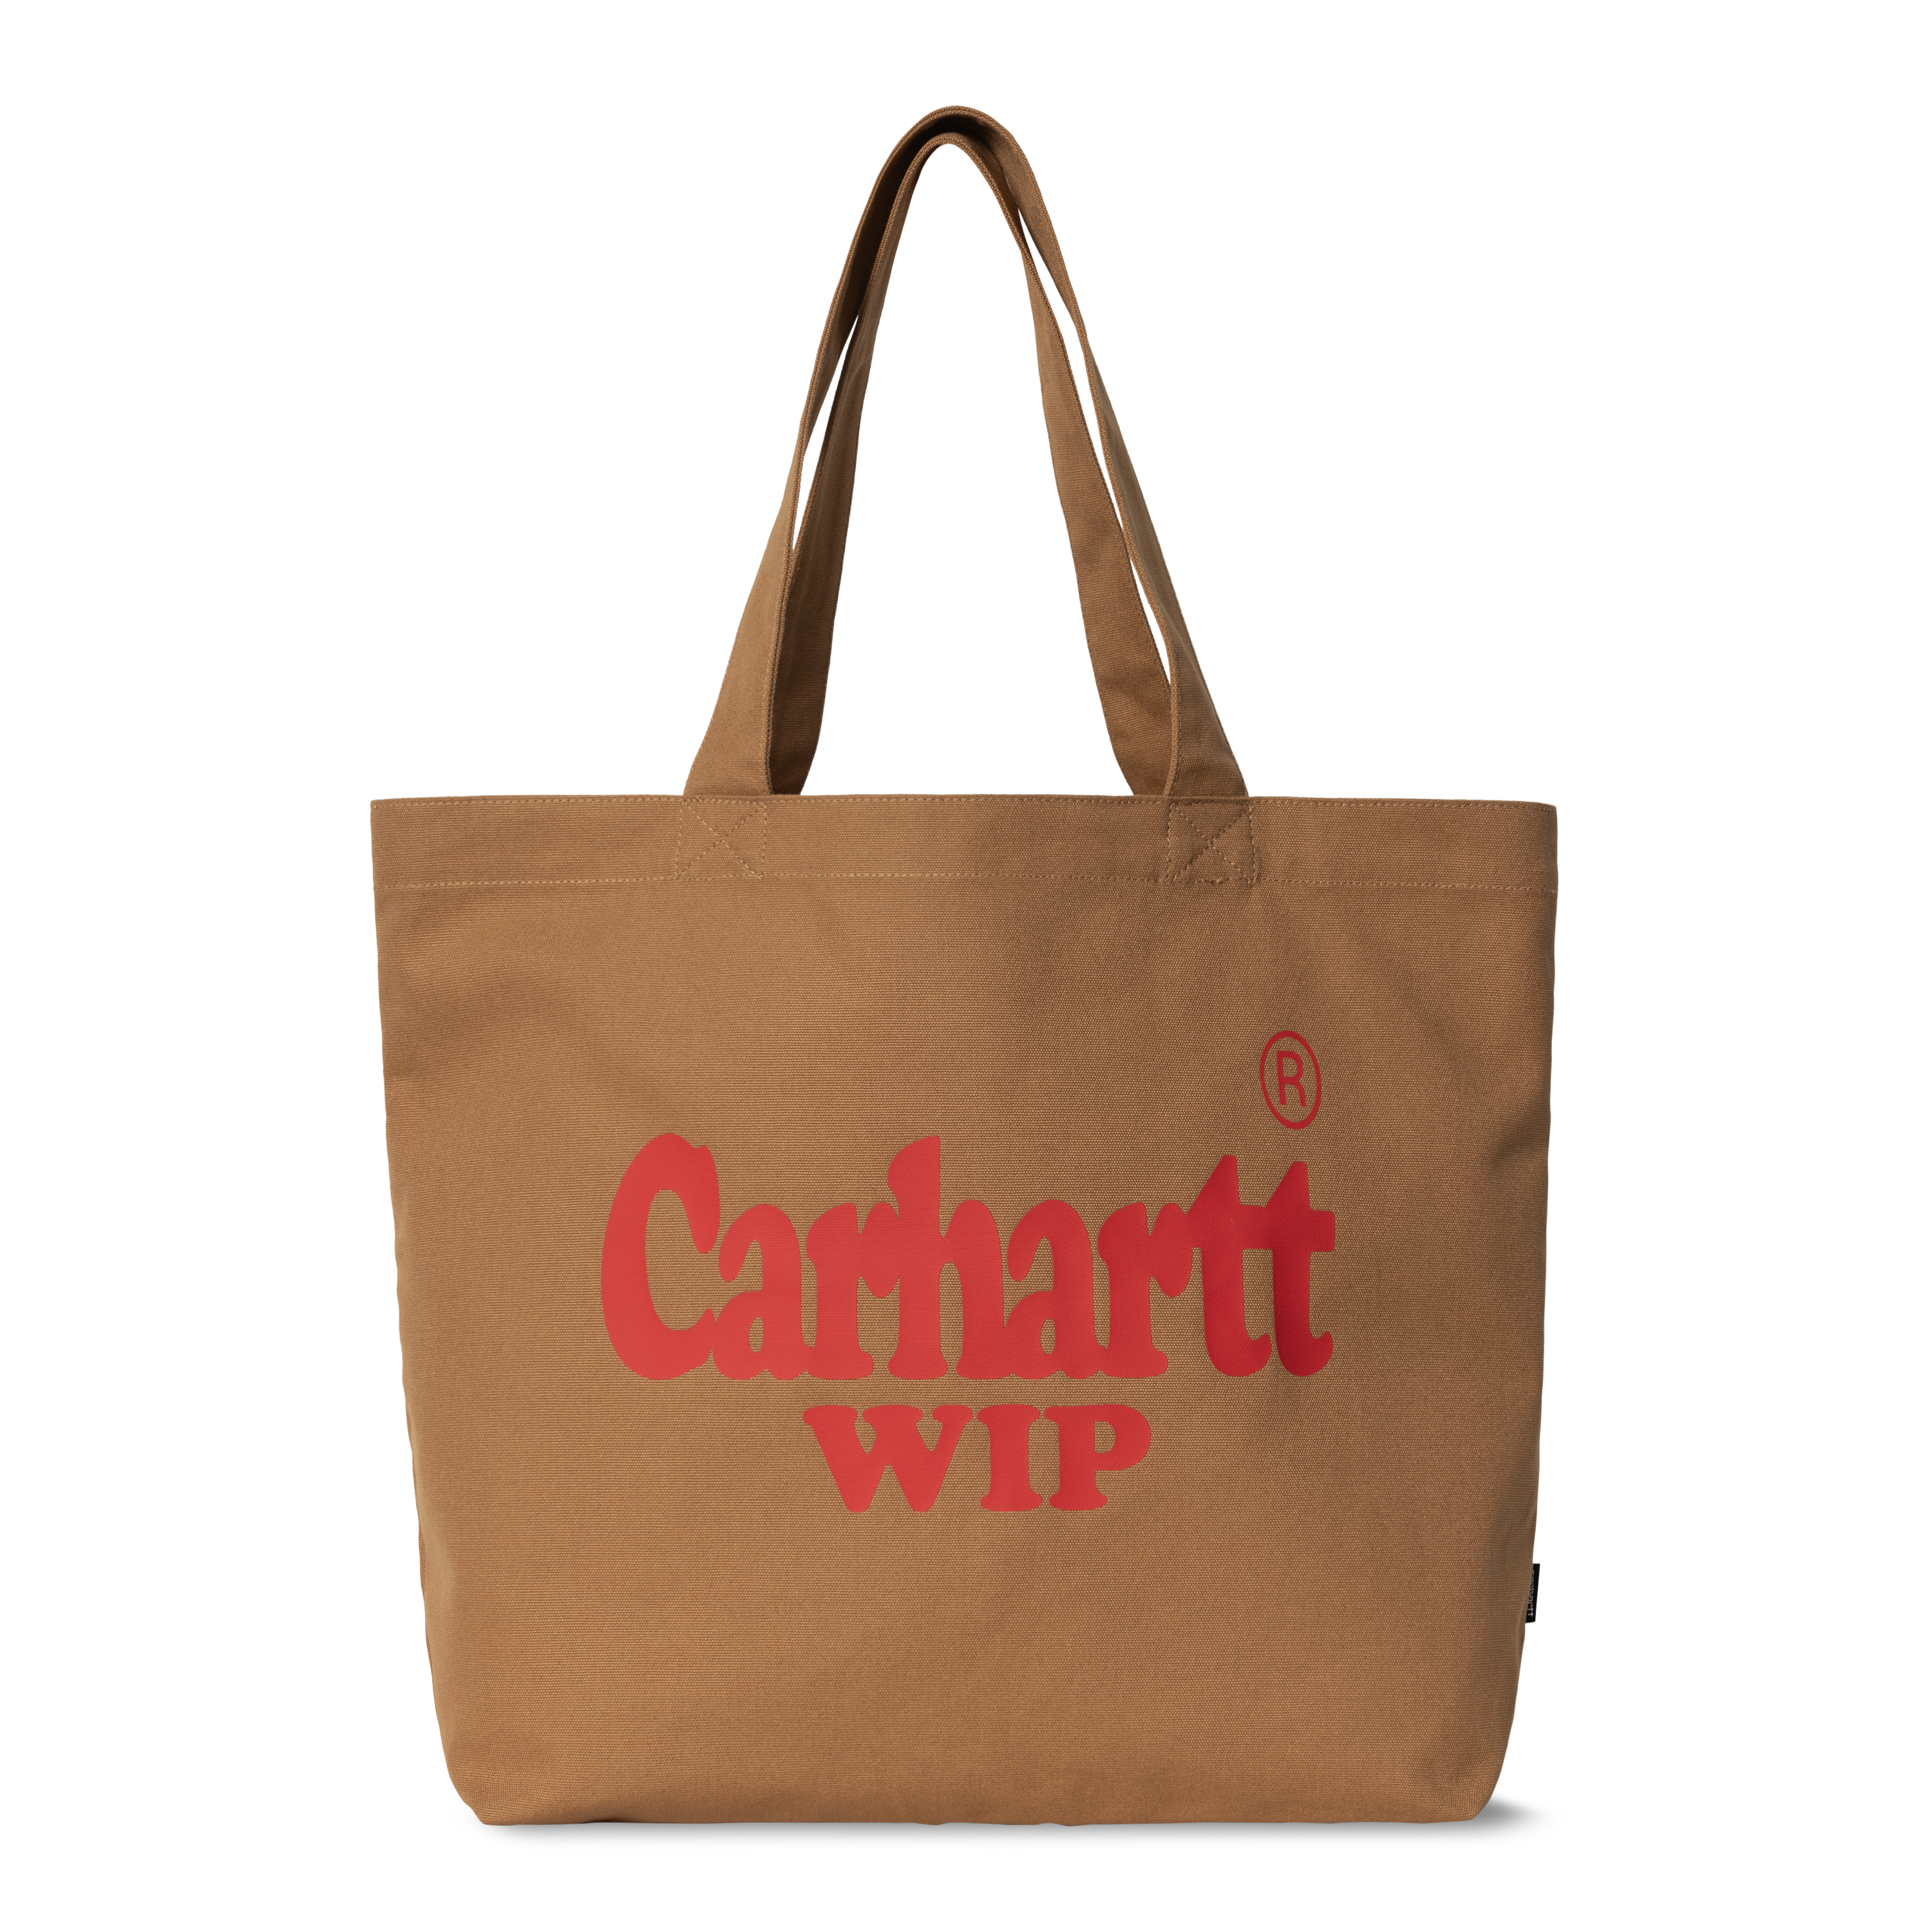 Carhartt WIP Canvas Graphic Tote Large in Marrone